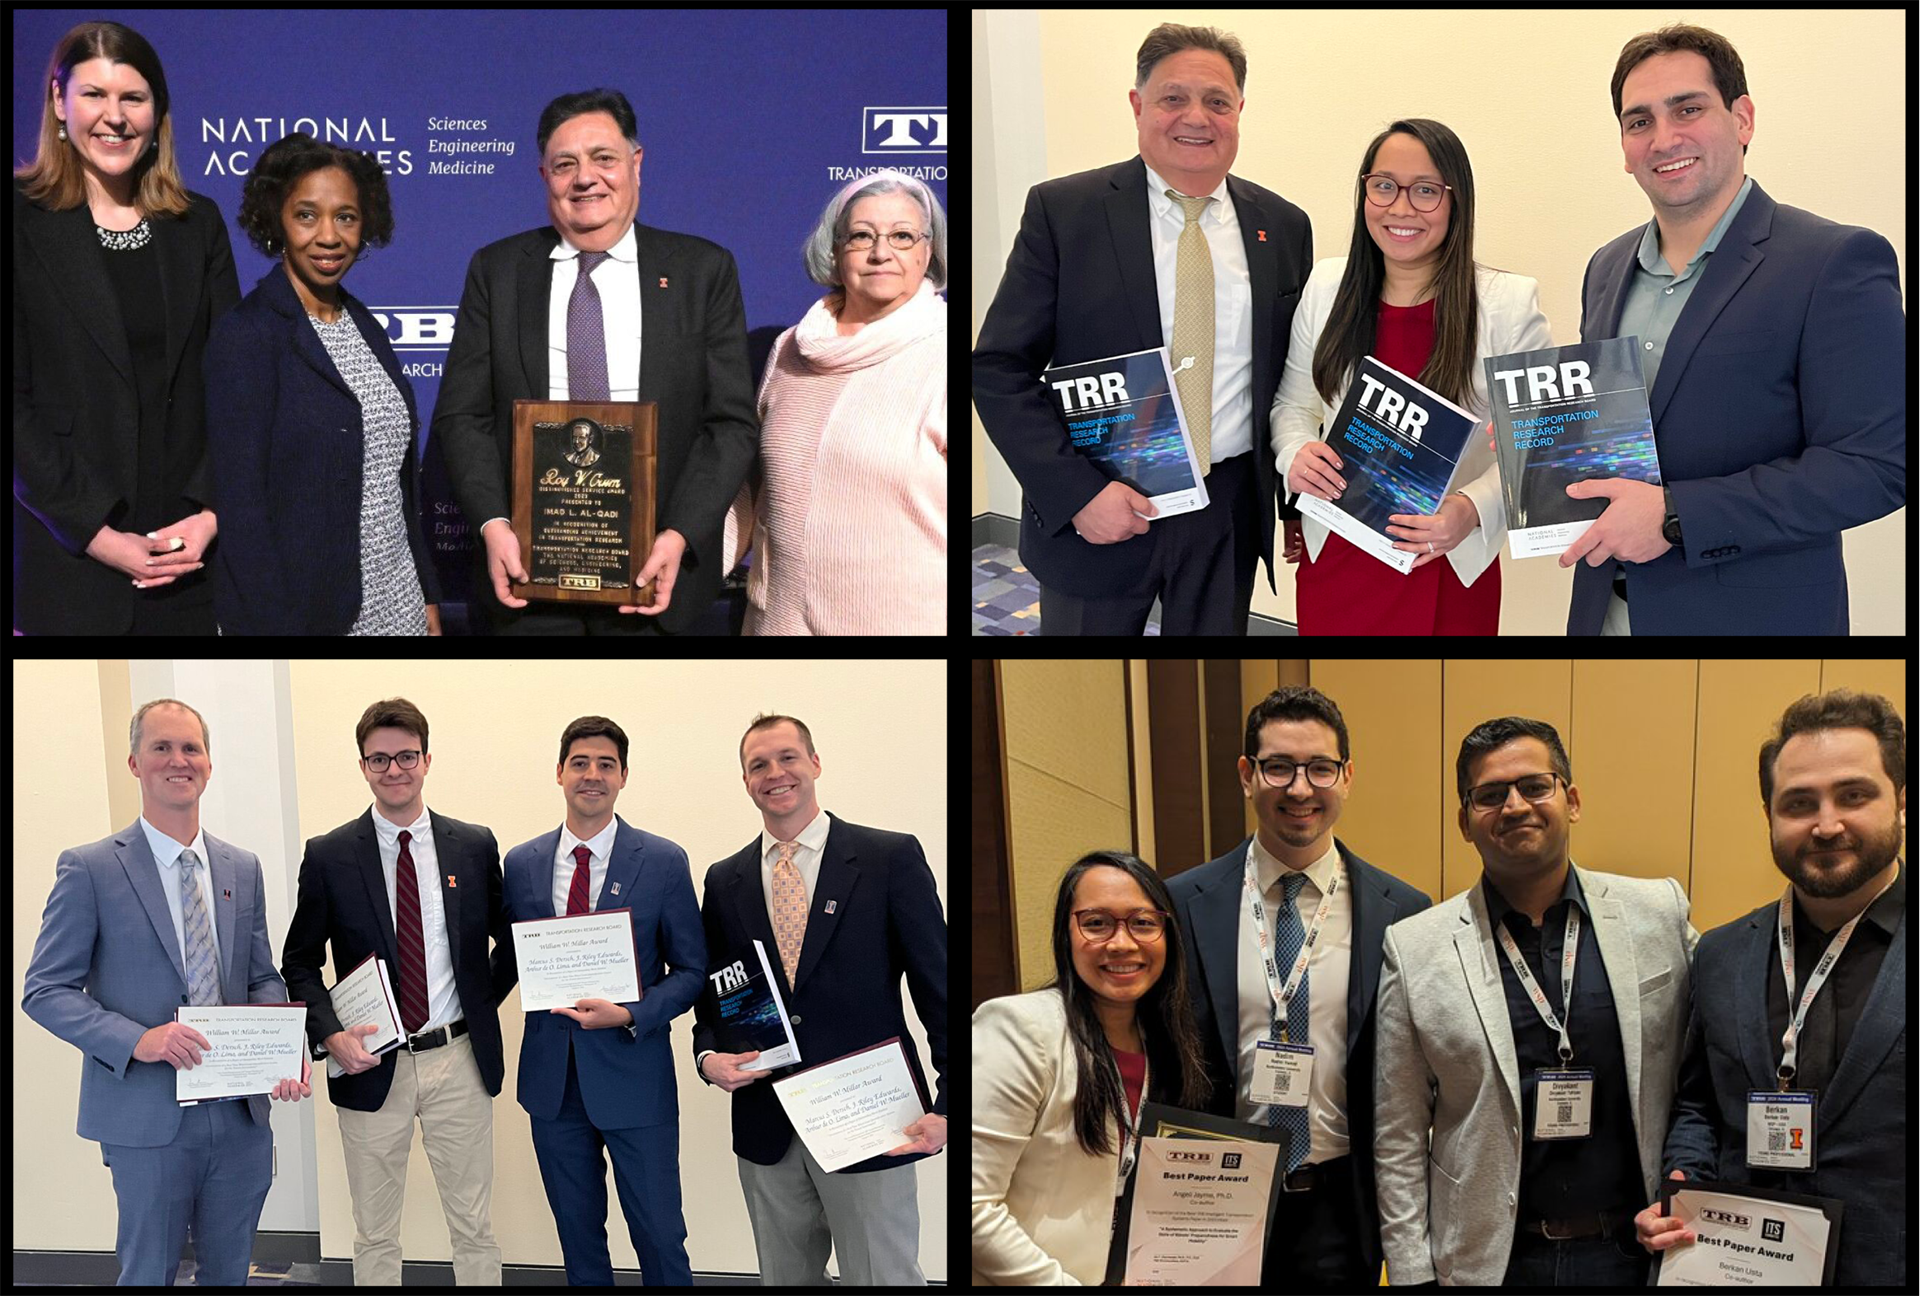 Clockwise from upper left: Al-Qadi with the Roy W. Crum Distinguished Service Award; Al-Qadi, Jayme, and Okte with the K.B.Woods Award; Jayme,&amp;amp;amp;amp;amp;amp;nbsp;&amp;amp;amp;amp;amp;lt;span dir=&amp;amp;amp;amp;amp;quot;ltr&amp;amp;amp;amp;amp;quot;&amp;amp;amp;amp;amp;gt;Nadim Hamad (Northwestern University), Divyakant Tahlyan (Northwestern University), and Usta with&amp;amp;amp;amp;amp;lt;/span&amp;amp;amp;amp;amp;gt;&amp;amp;amp;amp;amp;amp;nbsp;the Best Paper Award; the CEE RailTEC team with the William W. Millar Award.